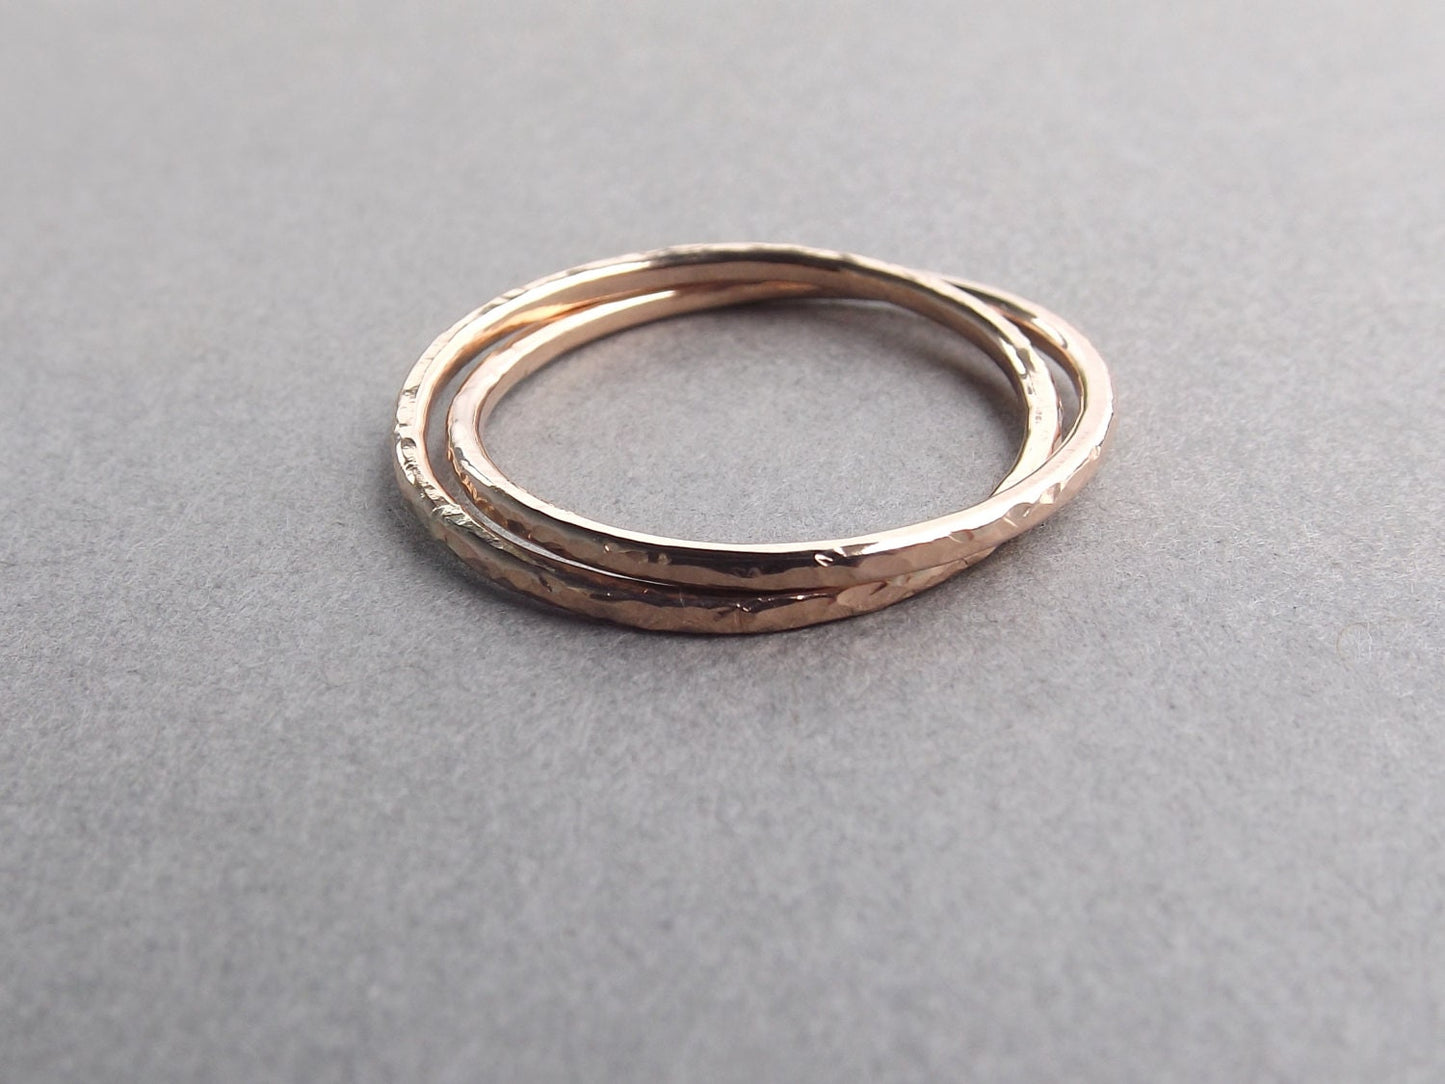 Gold Interlocking Thumb Rings,Thumb Rings,Gold Thumb Ring,Textured Rings,Rolling Ring,Stacking Rings, Minimalist Rings,Unique Ring,Rose Gold